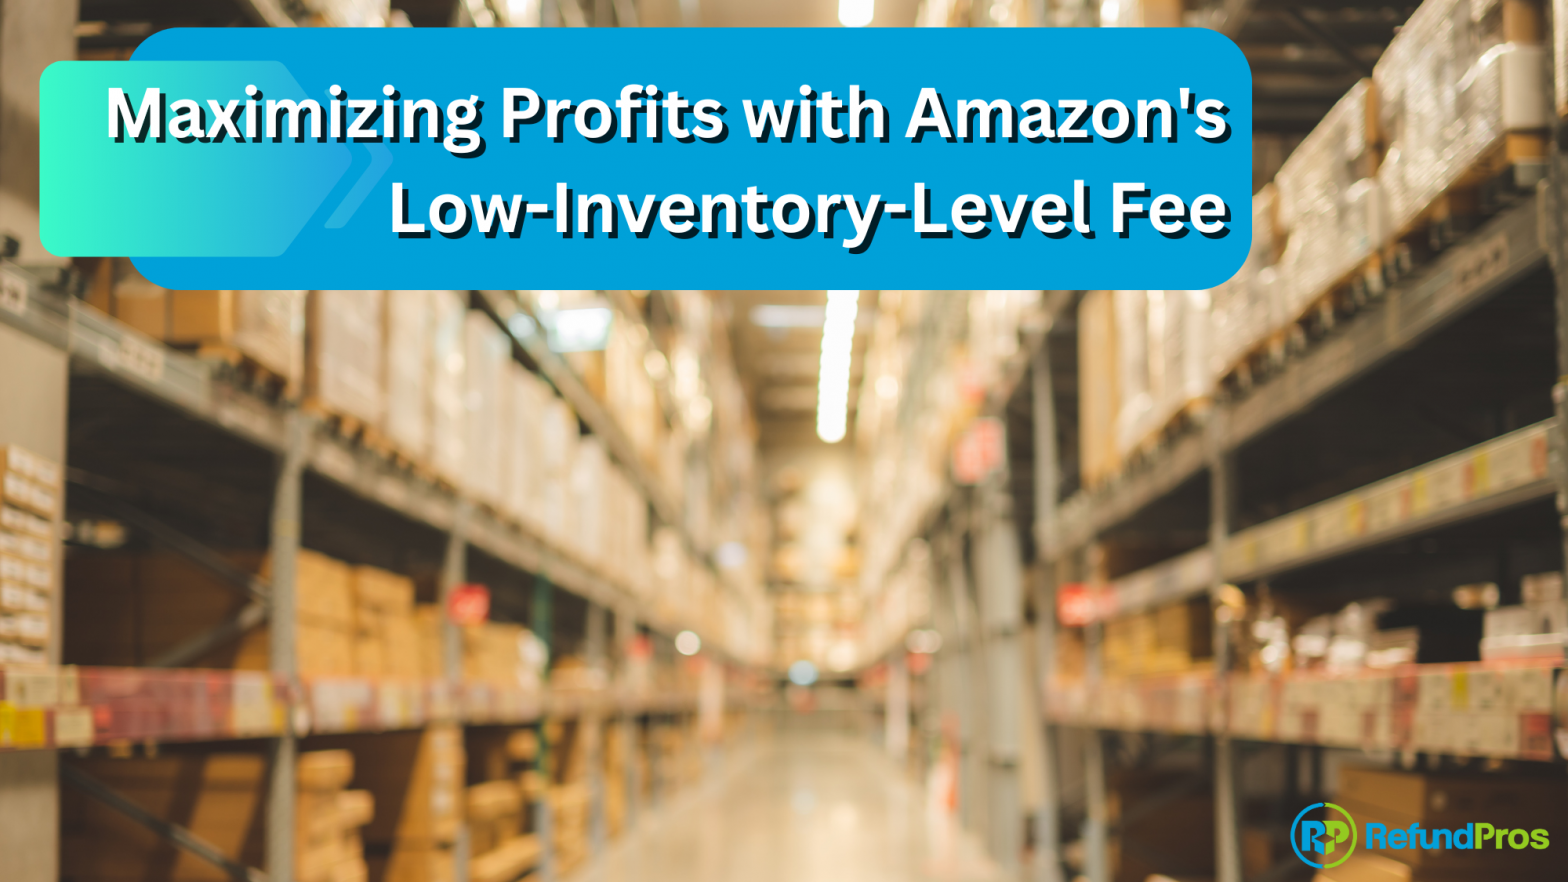 Amazon introduced the low-inventory-level fee to encourage sellers to maintain healthy inventory levels, thereby ensuring that products are readily available and can be shipped quickly to customers.